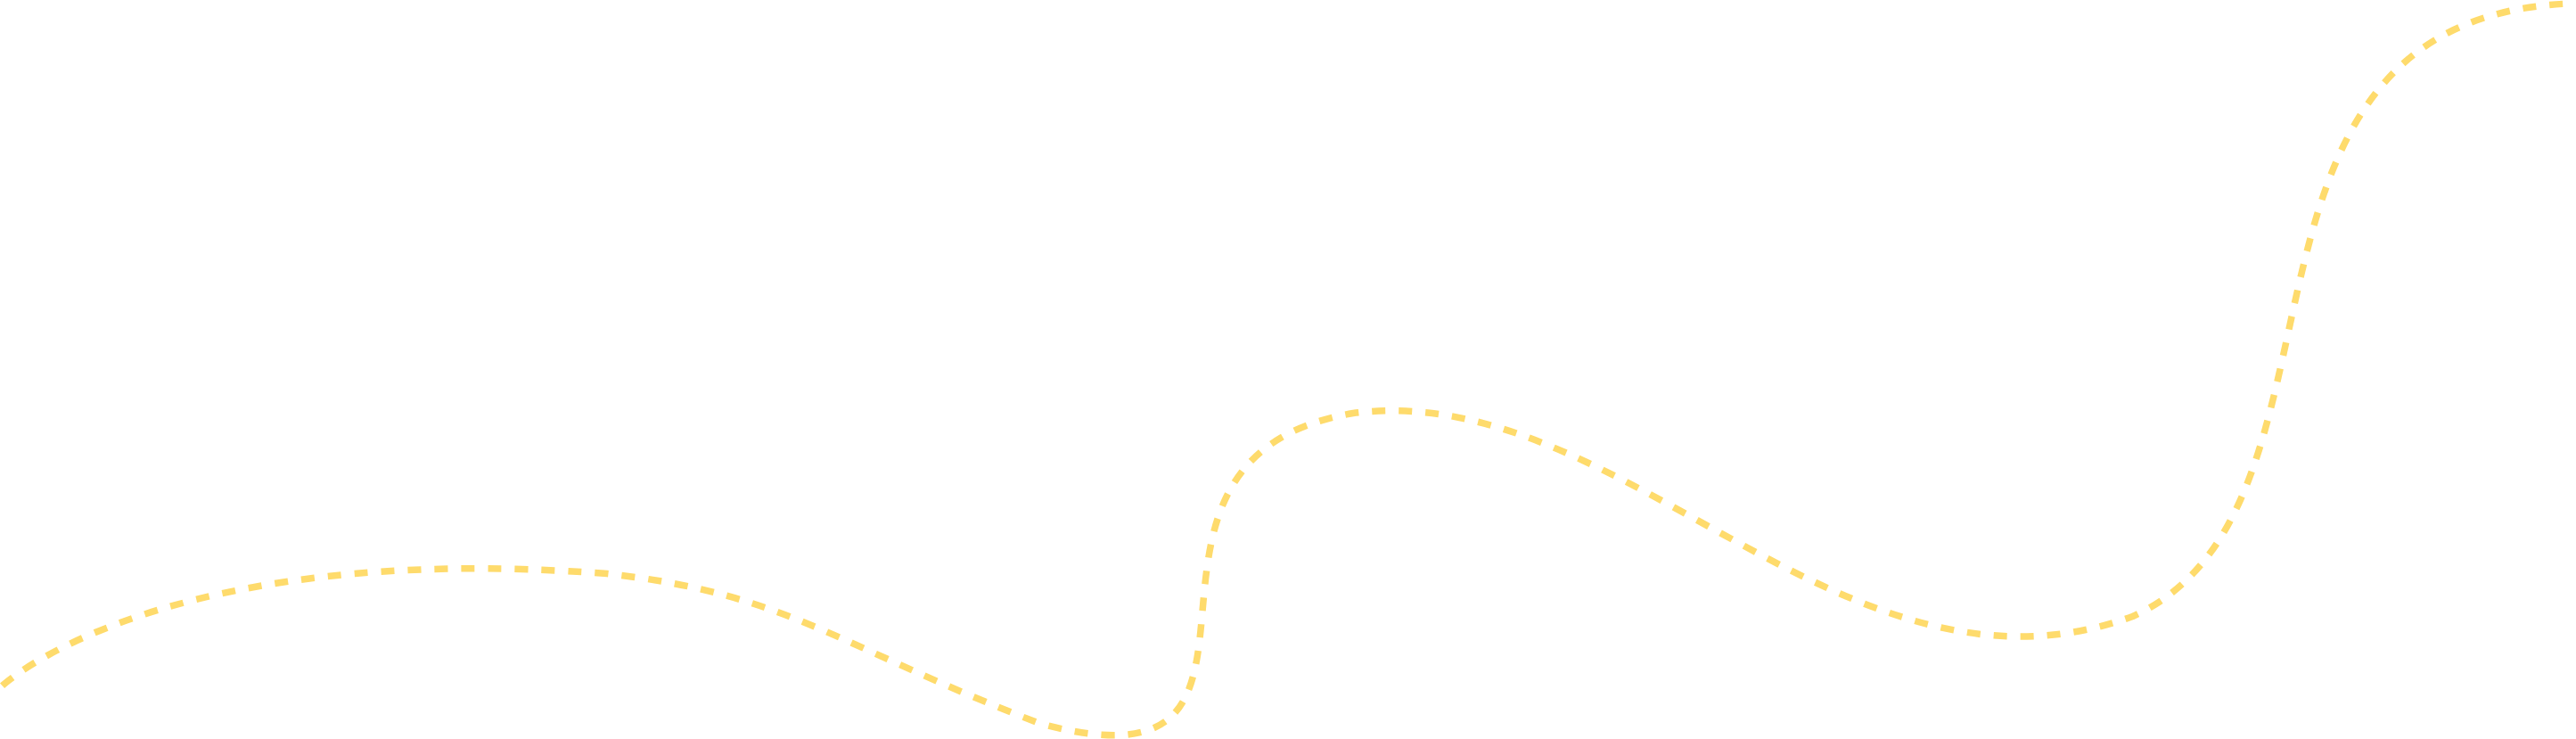 Yellow Dashed Line